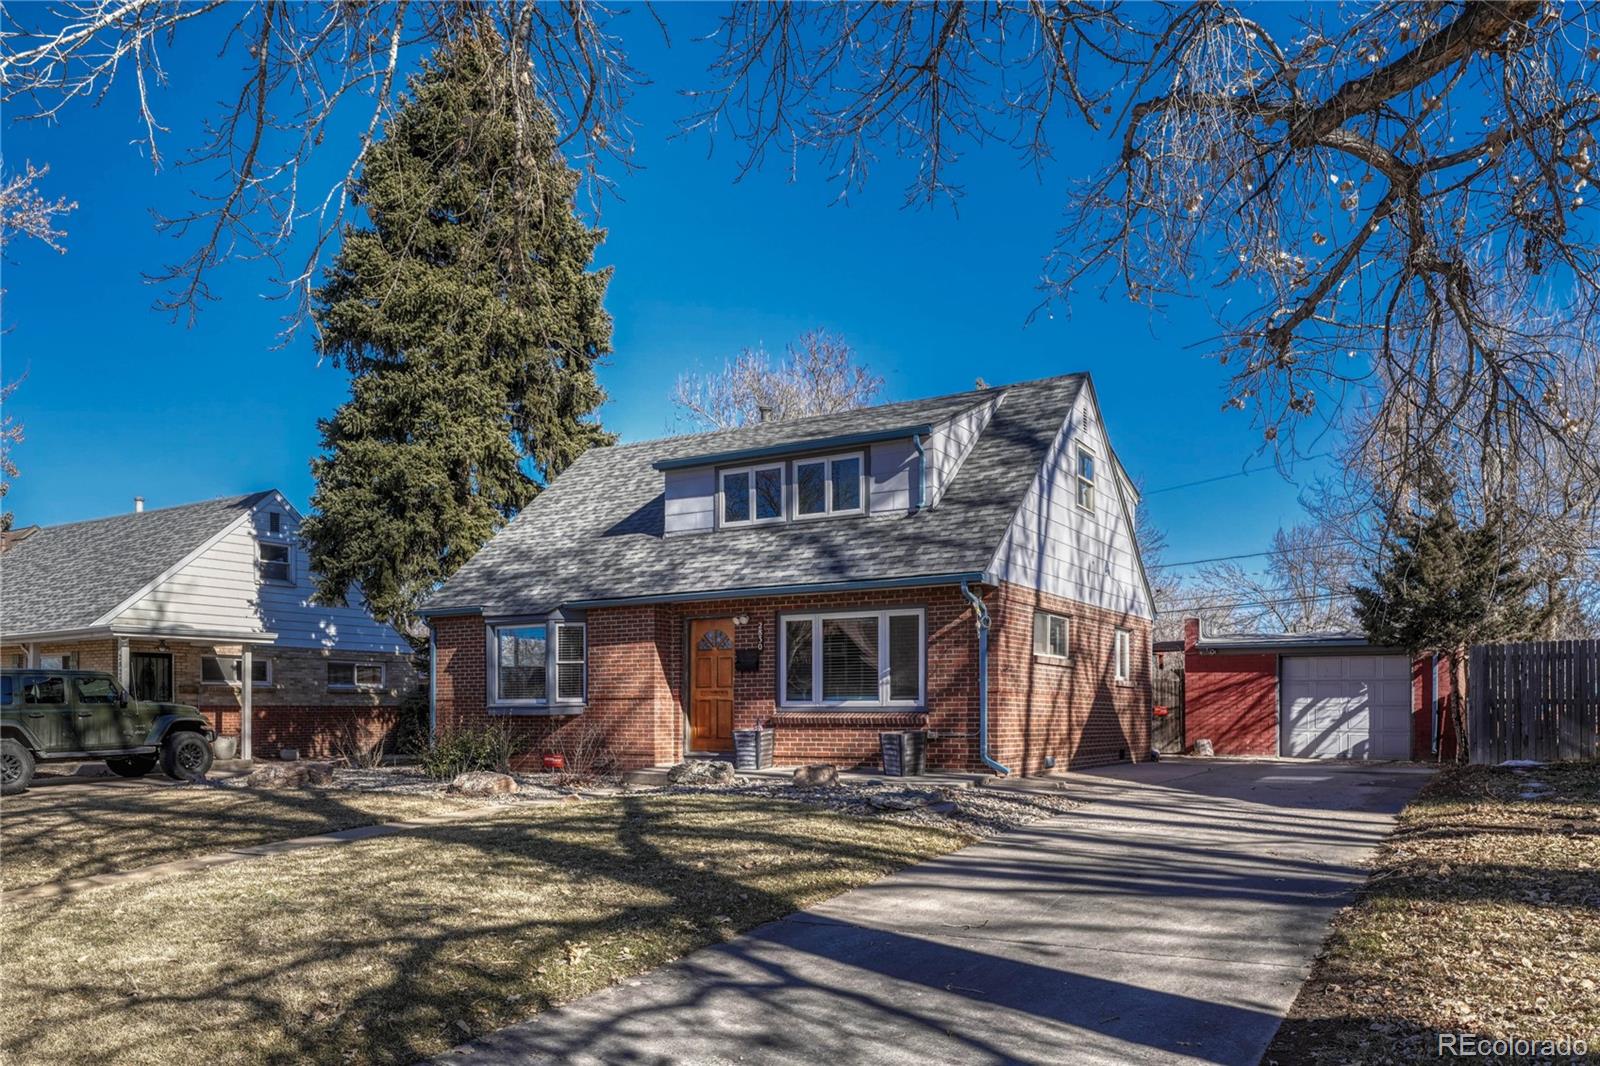 Report Image for 2830 S Gaylord Street,Denver, Colorado